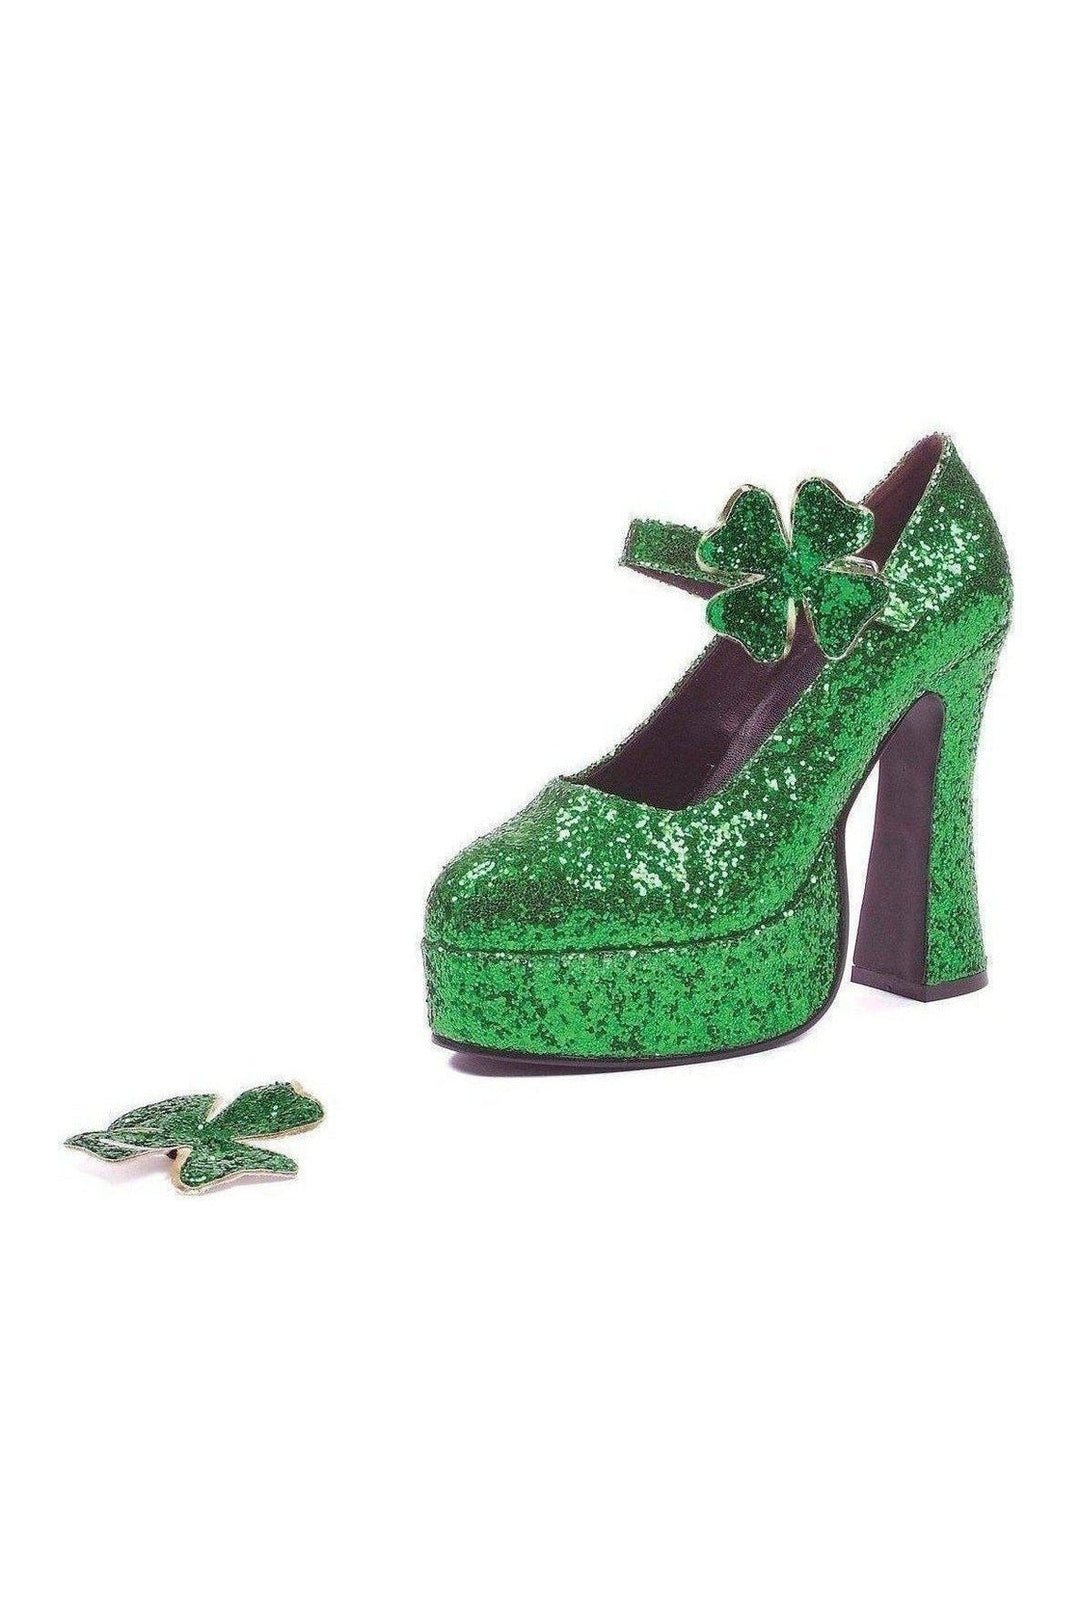 557-LUCKY Costume Pump | Green Glitter-Ellie Shoes-SEXYSHOES.COM